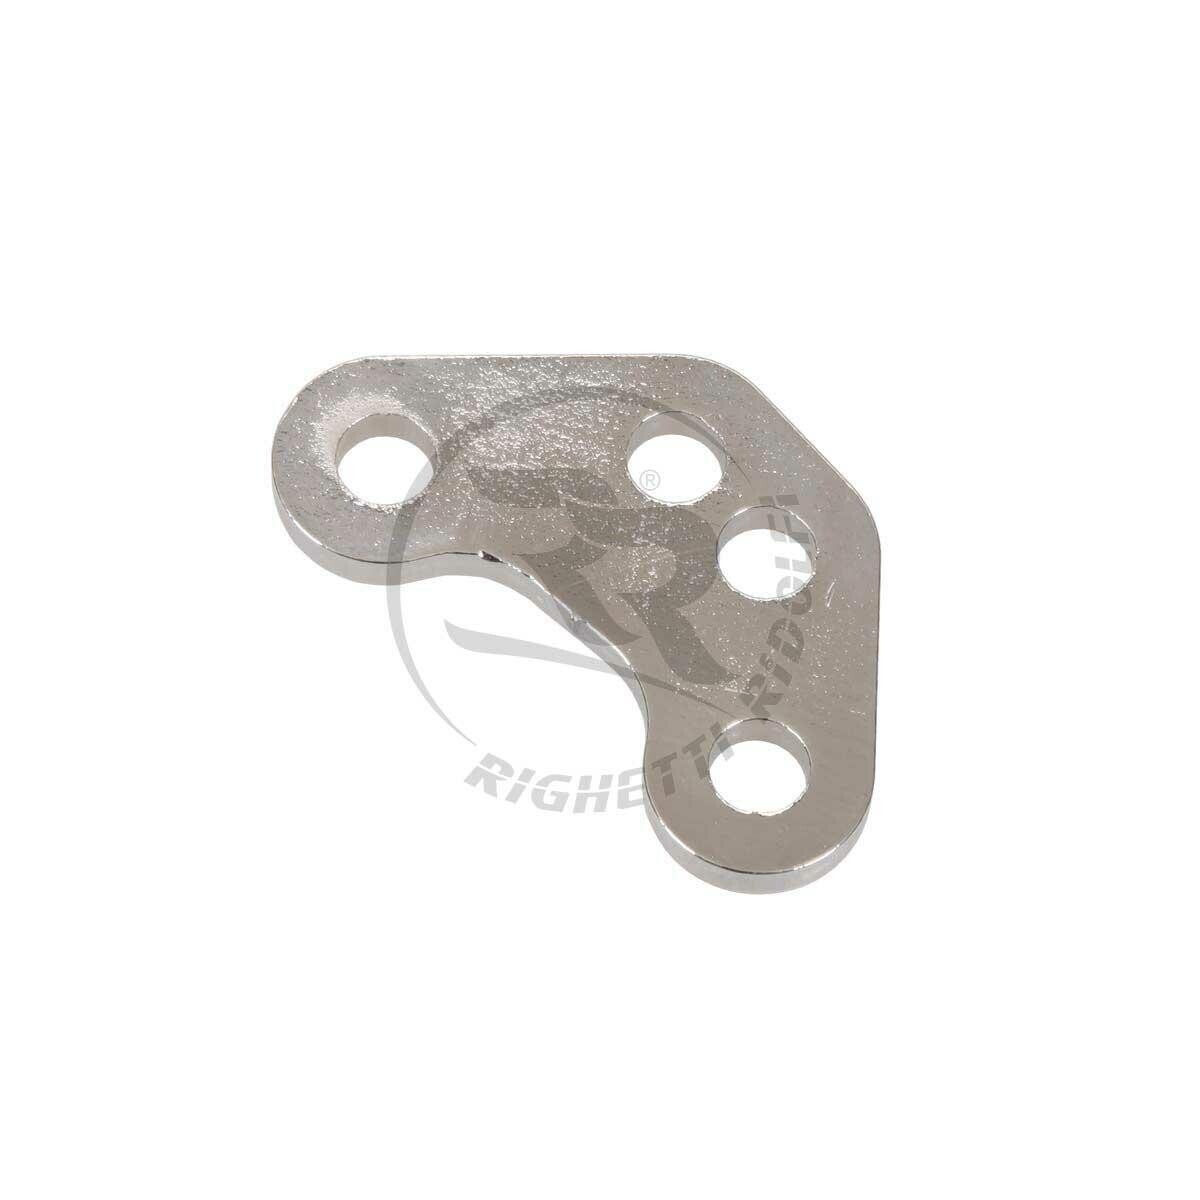 Seat support plate